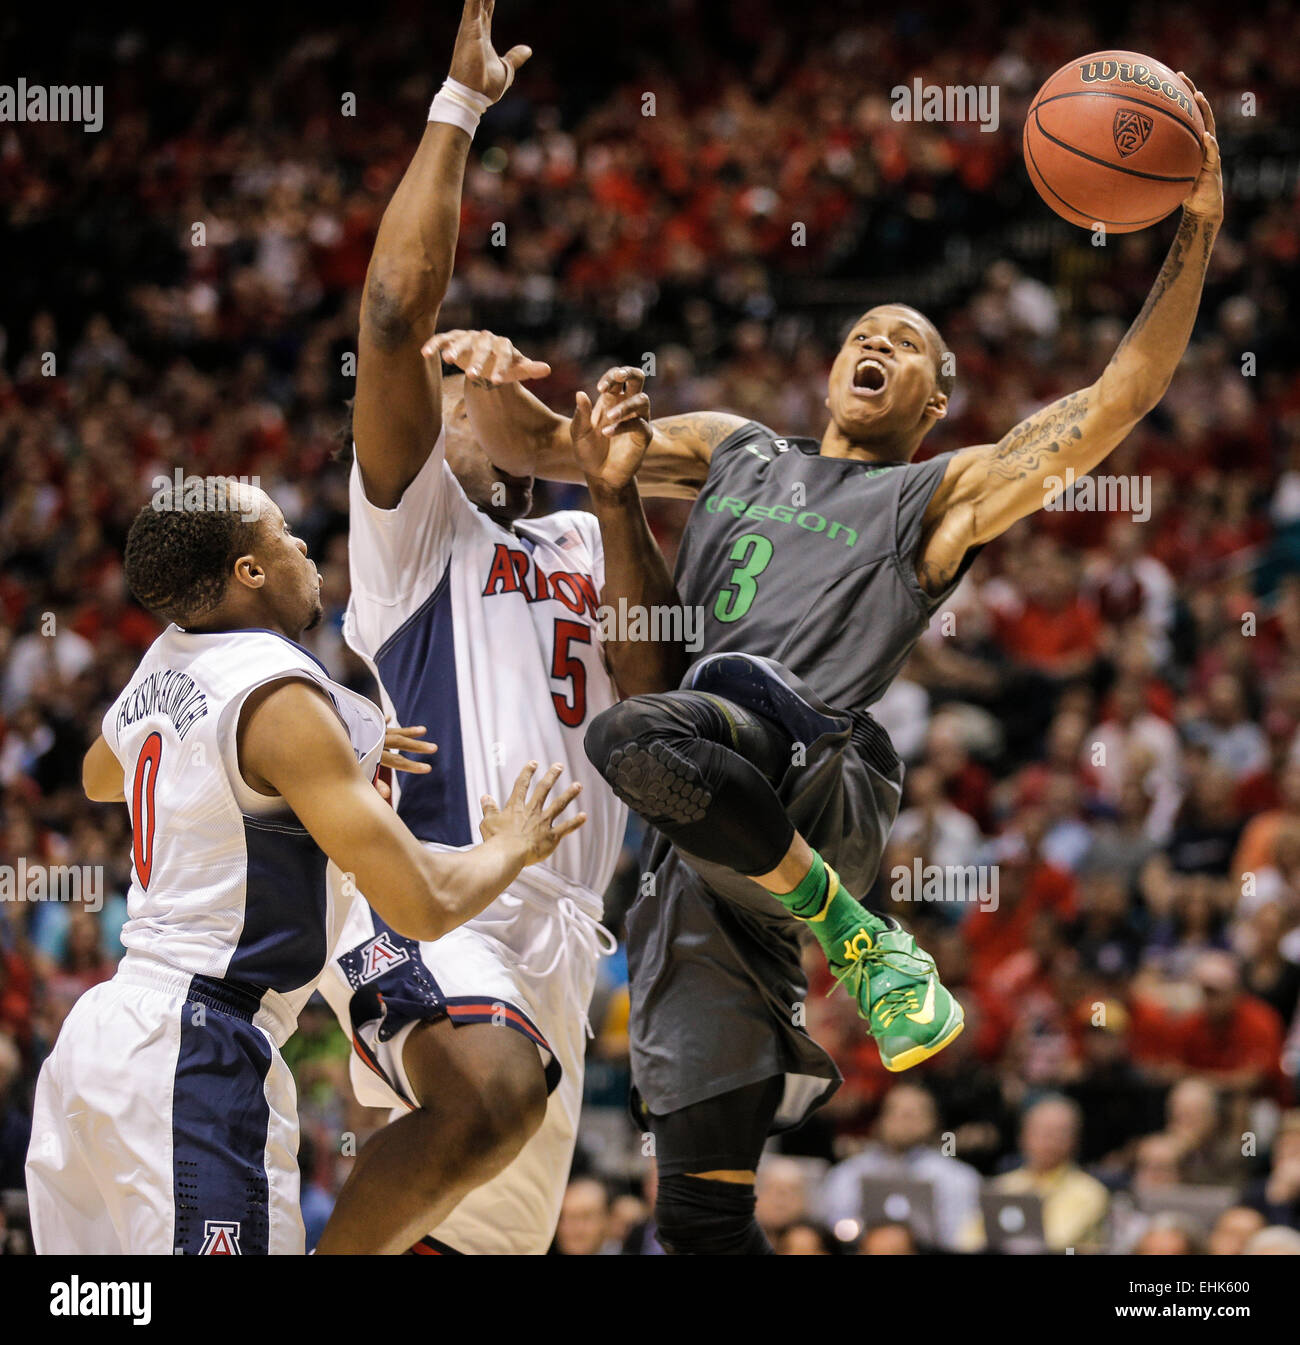 Las Vegas, NV, USA. 14th Mar, 2015. Oregon G # 3 Joseph Young tries to take the baseline tries to slam dunk over Arizona # 5 Stanley Johnson and # 0 Parker Jackson-Cartwright during NCAA Pac 12 Men's Basketball Tournament between Arizona Wildcats and Oregon Ducks 52-80 lost at MGM Grand Garden Arena Las Vegas, NV. Credit:  csm/Alamy Live News Stock Photo